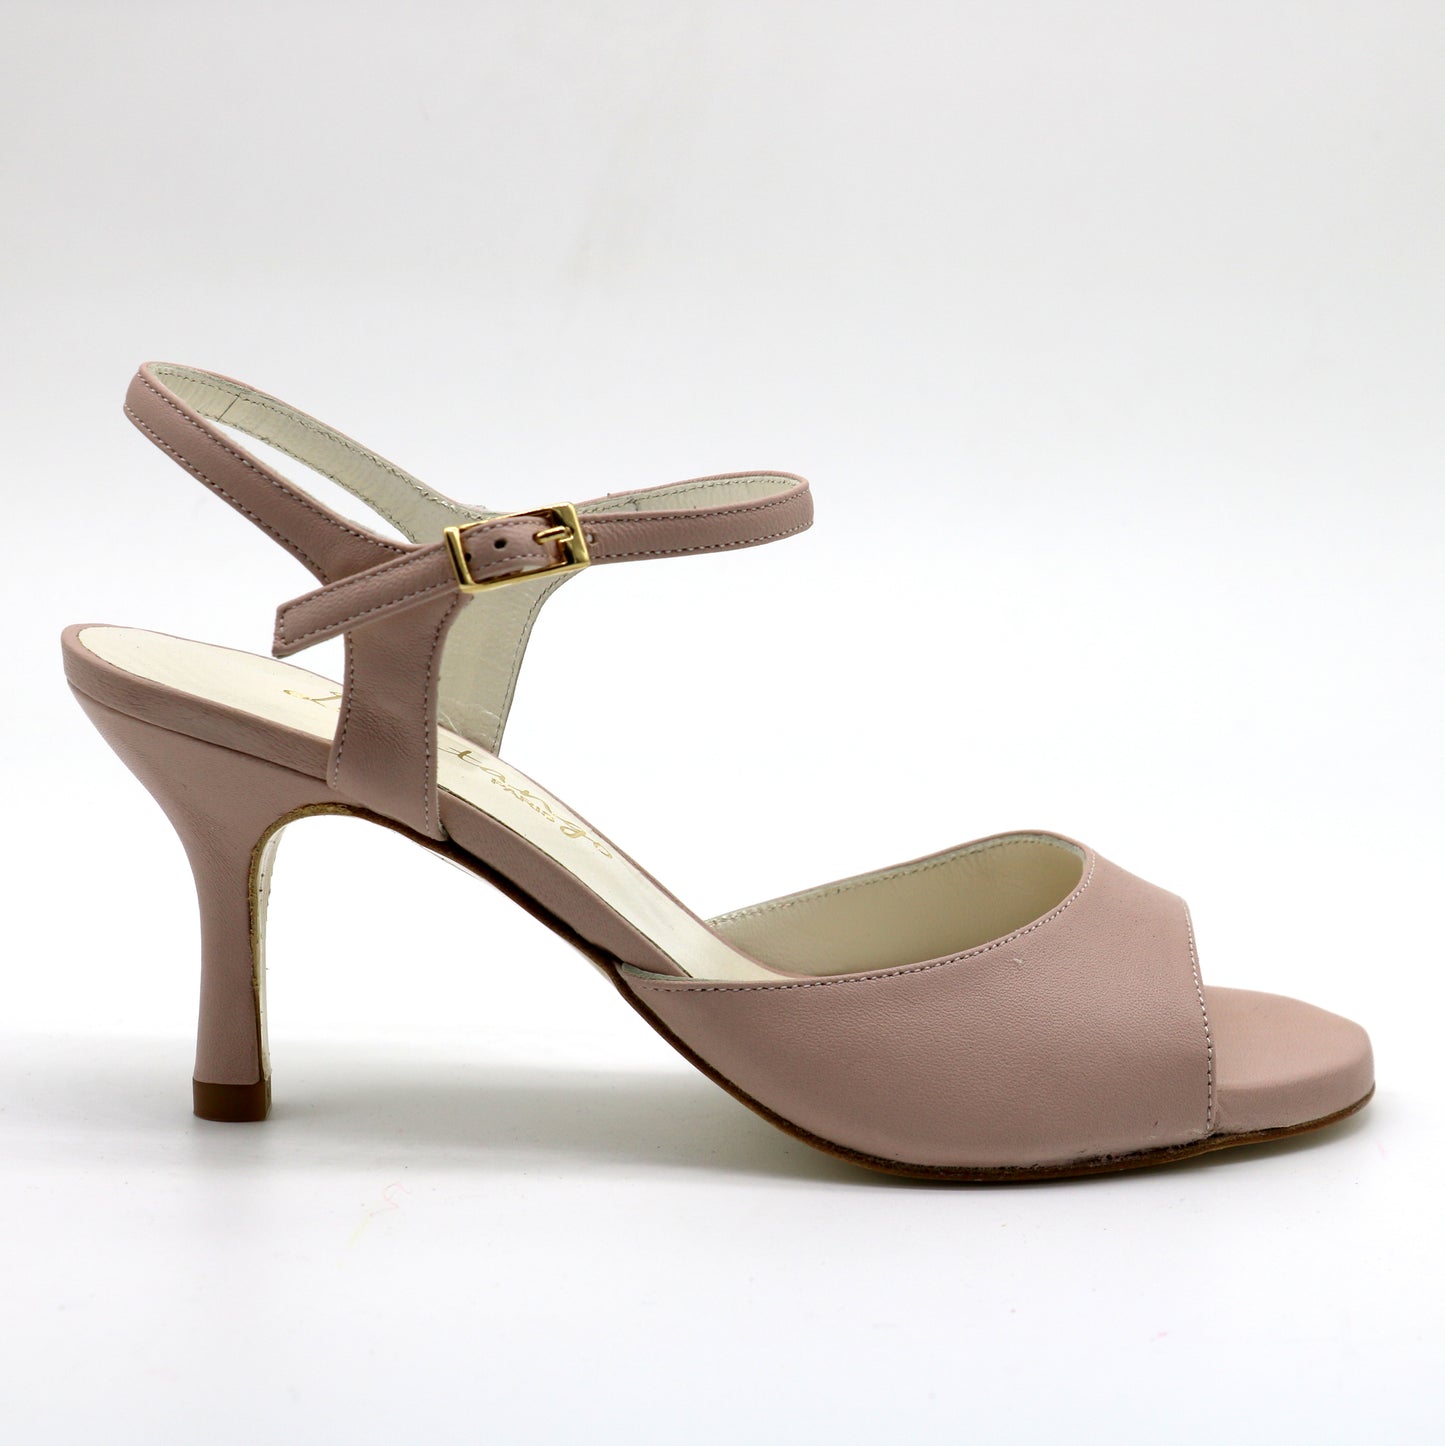 Uno Nude smooth leather heels 7cm